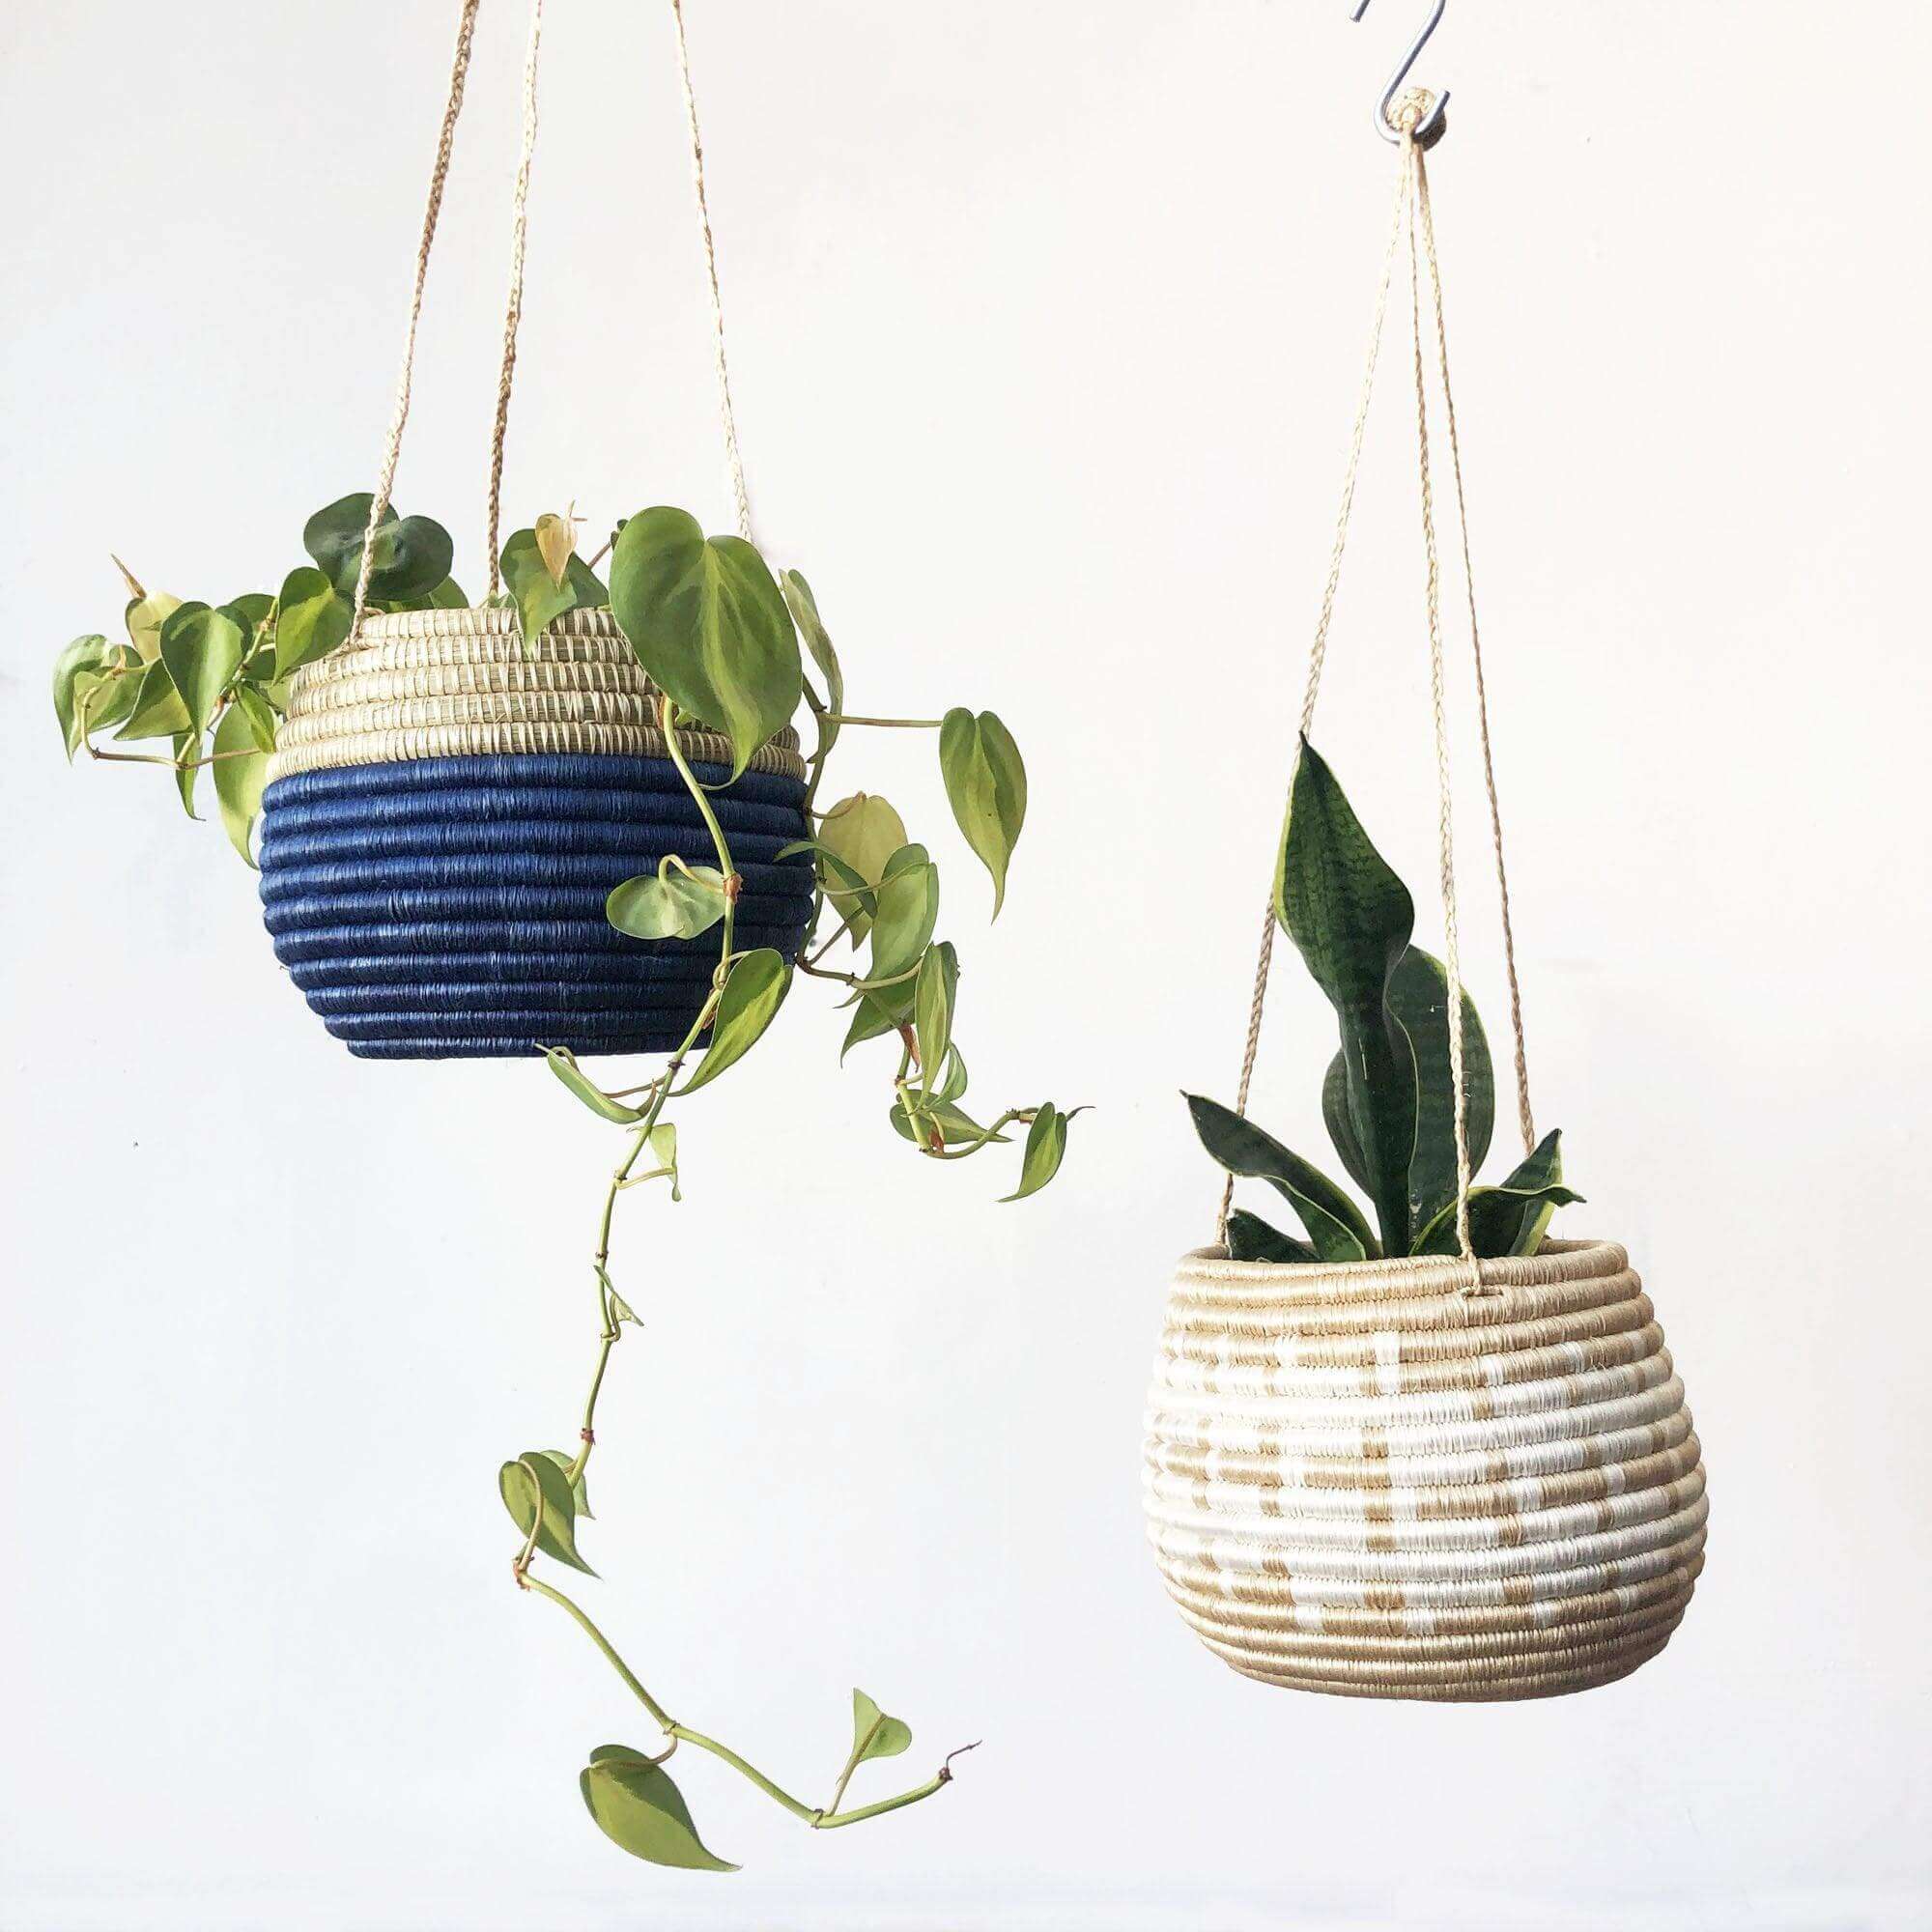 Woven hanging planters